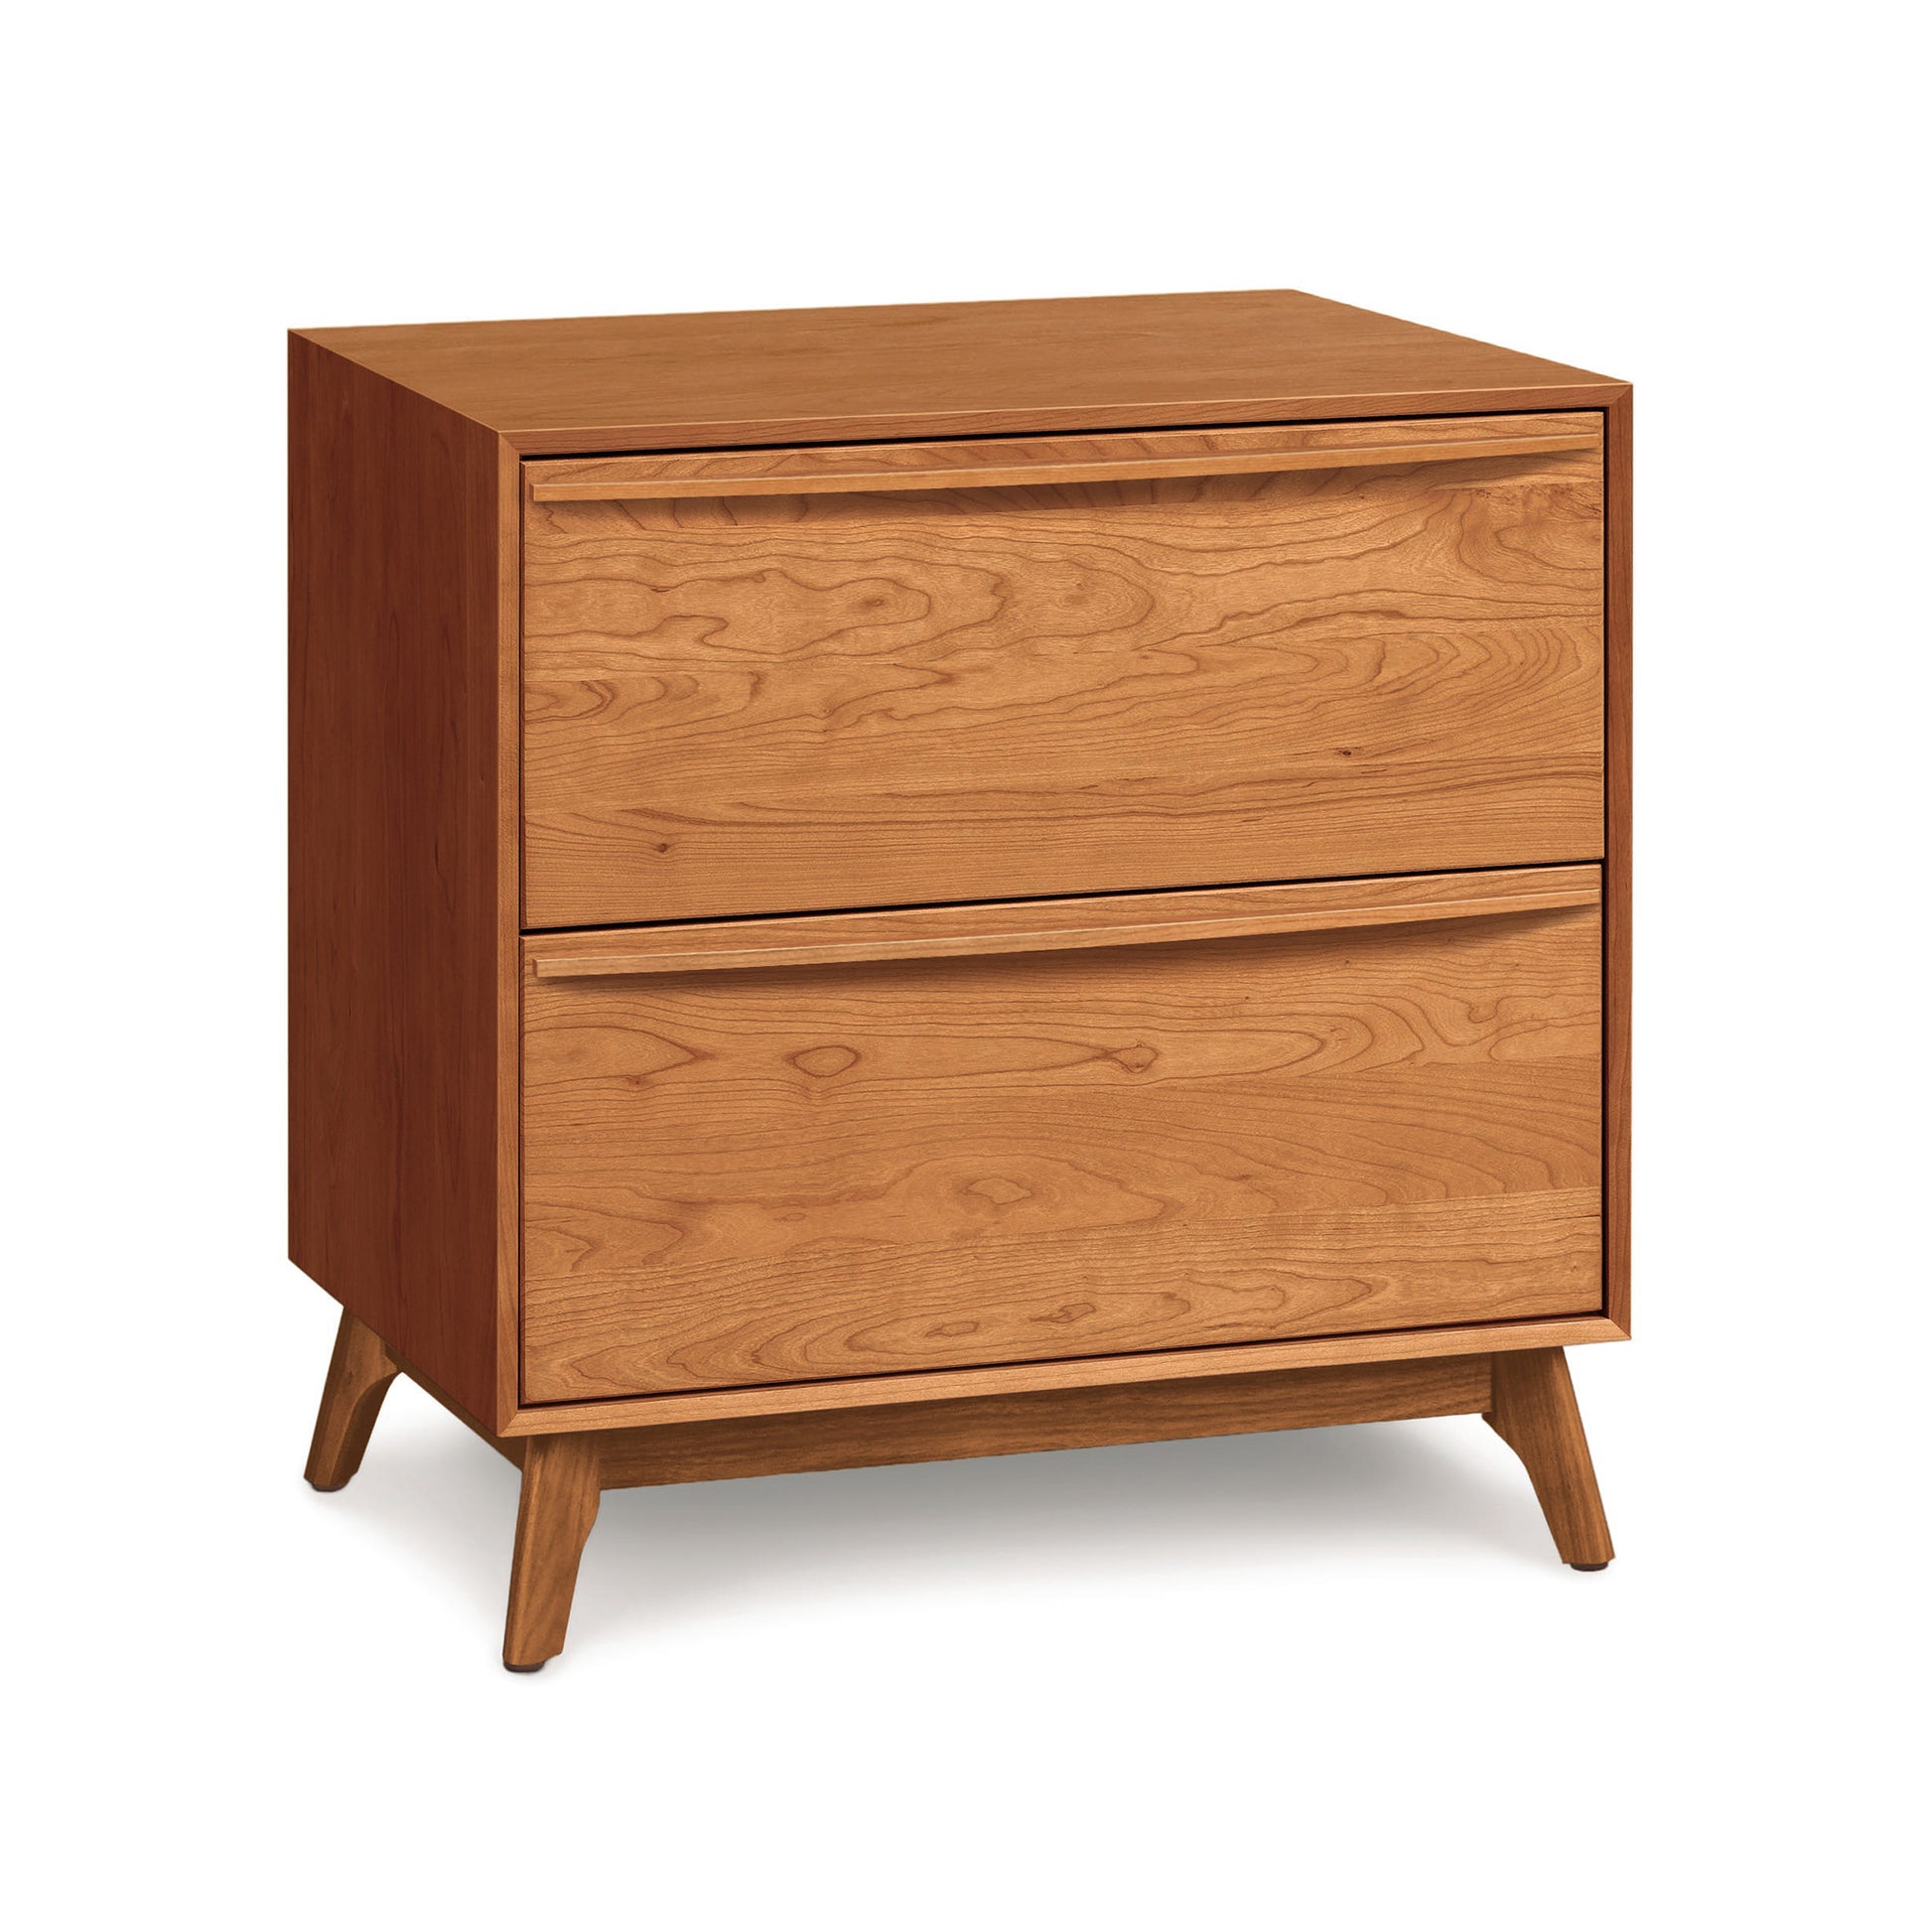 A Copeland Furniture Catalina 2-Drawer Nightstand made from solid natural hardwoods, with angled legs on a white background.